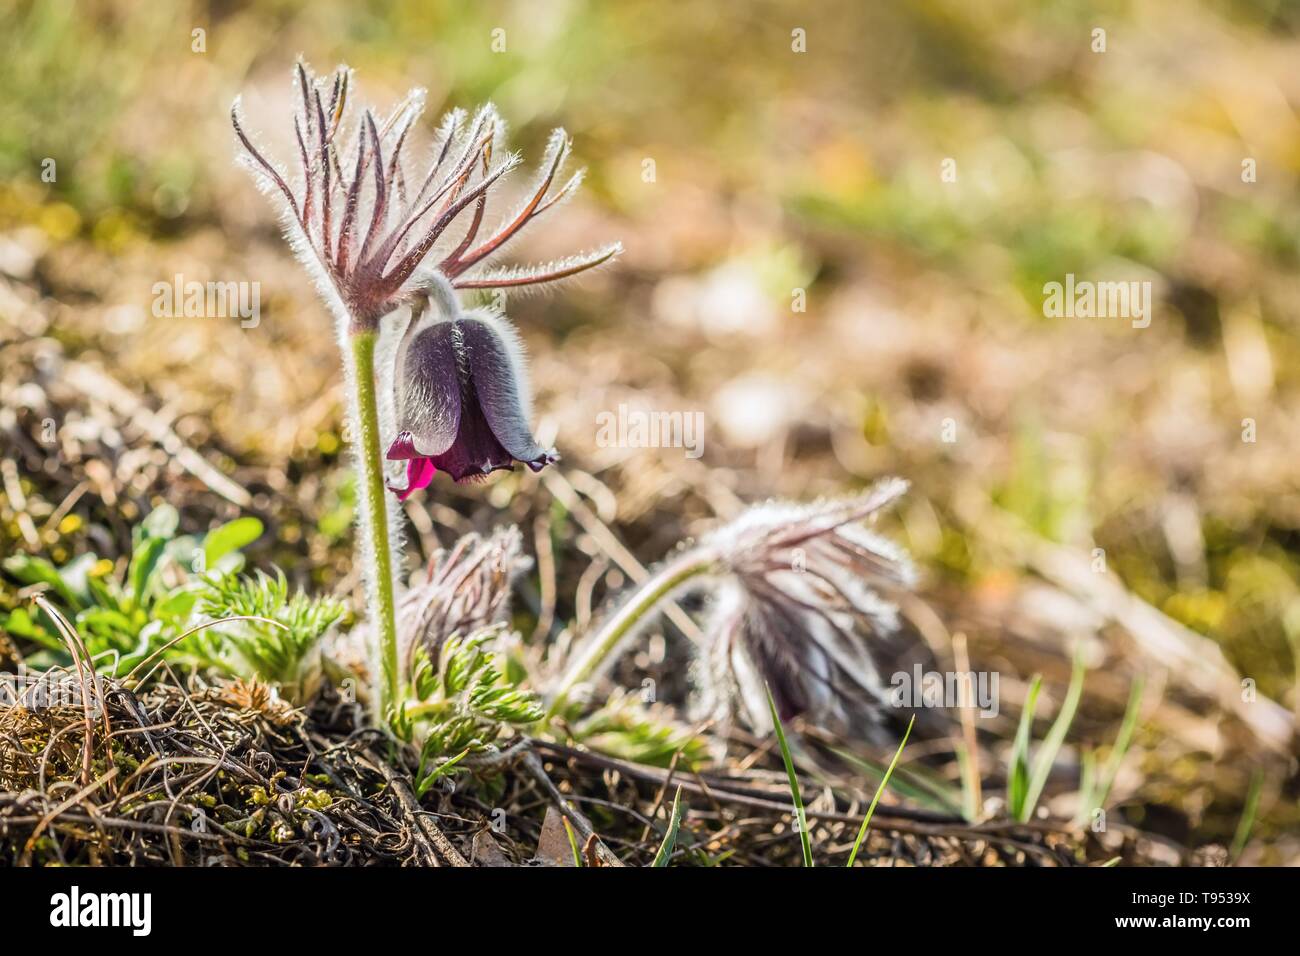 Fresh meadow anemone, also called small pasque flower with dark purple cup like flowers and hairy stalk growing in a gravelly meadow. Sunny day. Stock Photo